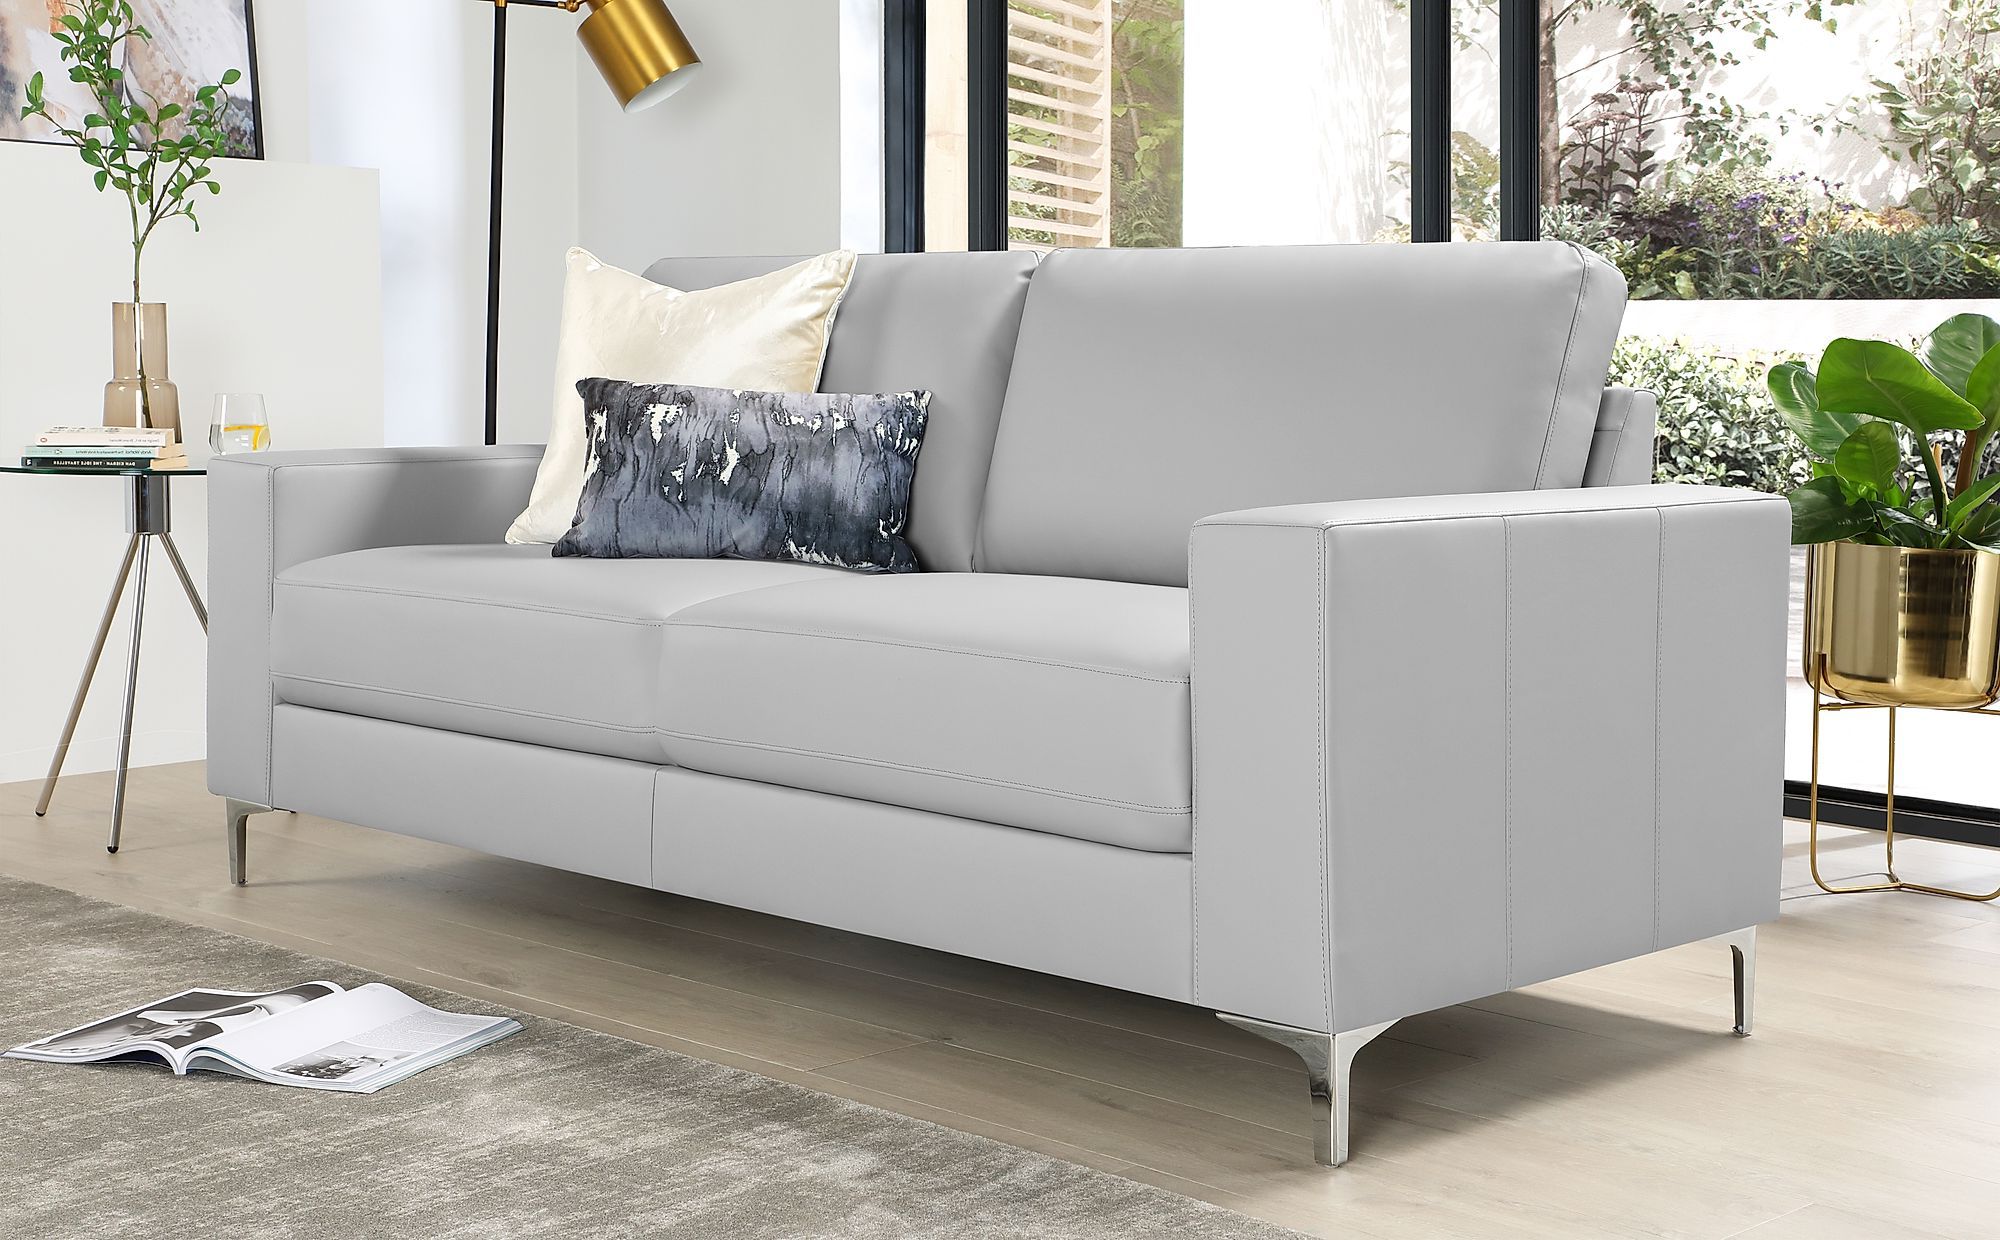 Baltimore Light Grey Leather 3 Seater Sofa | Furniture Choice Intended For Sofas In Light Gray (View 3 of 20)